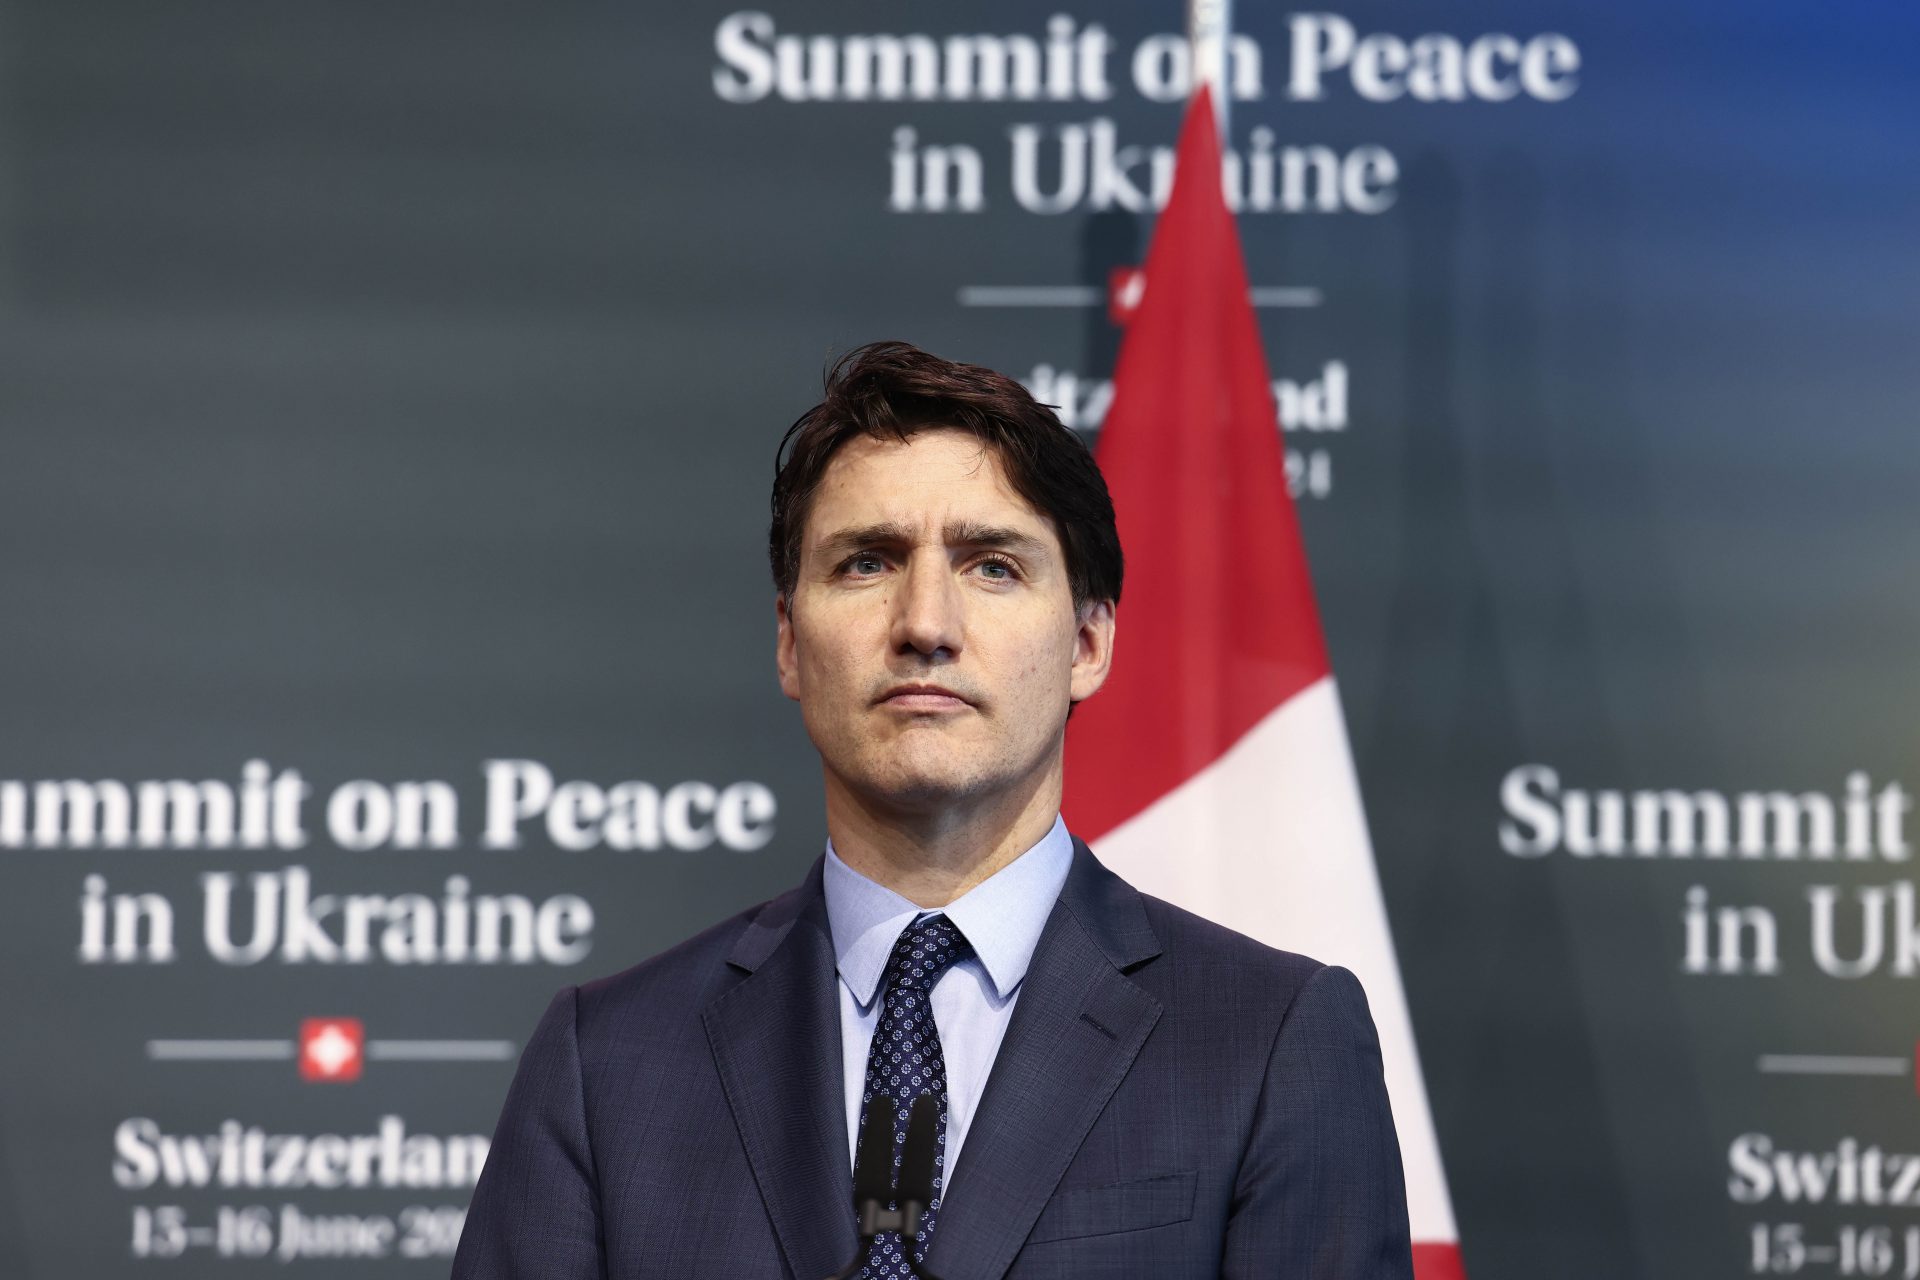 Most Canadians want Trudeau to step down